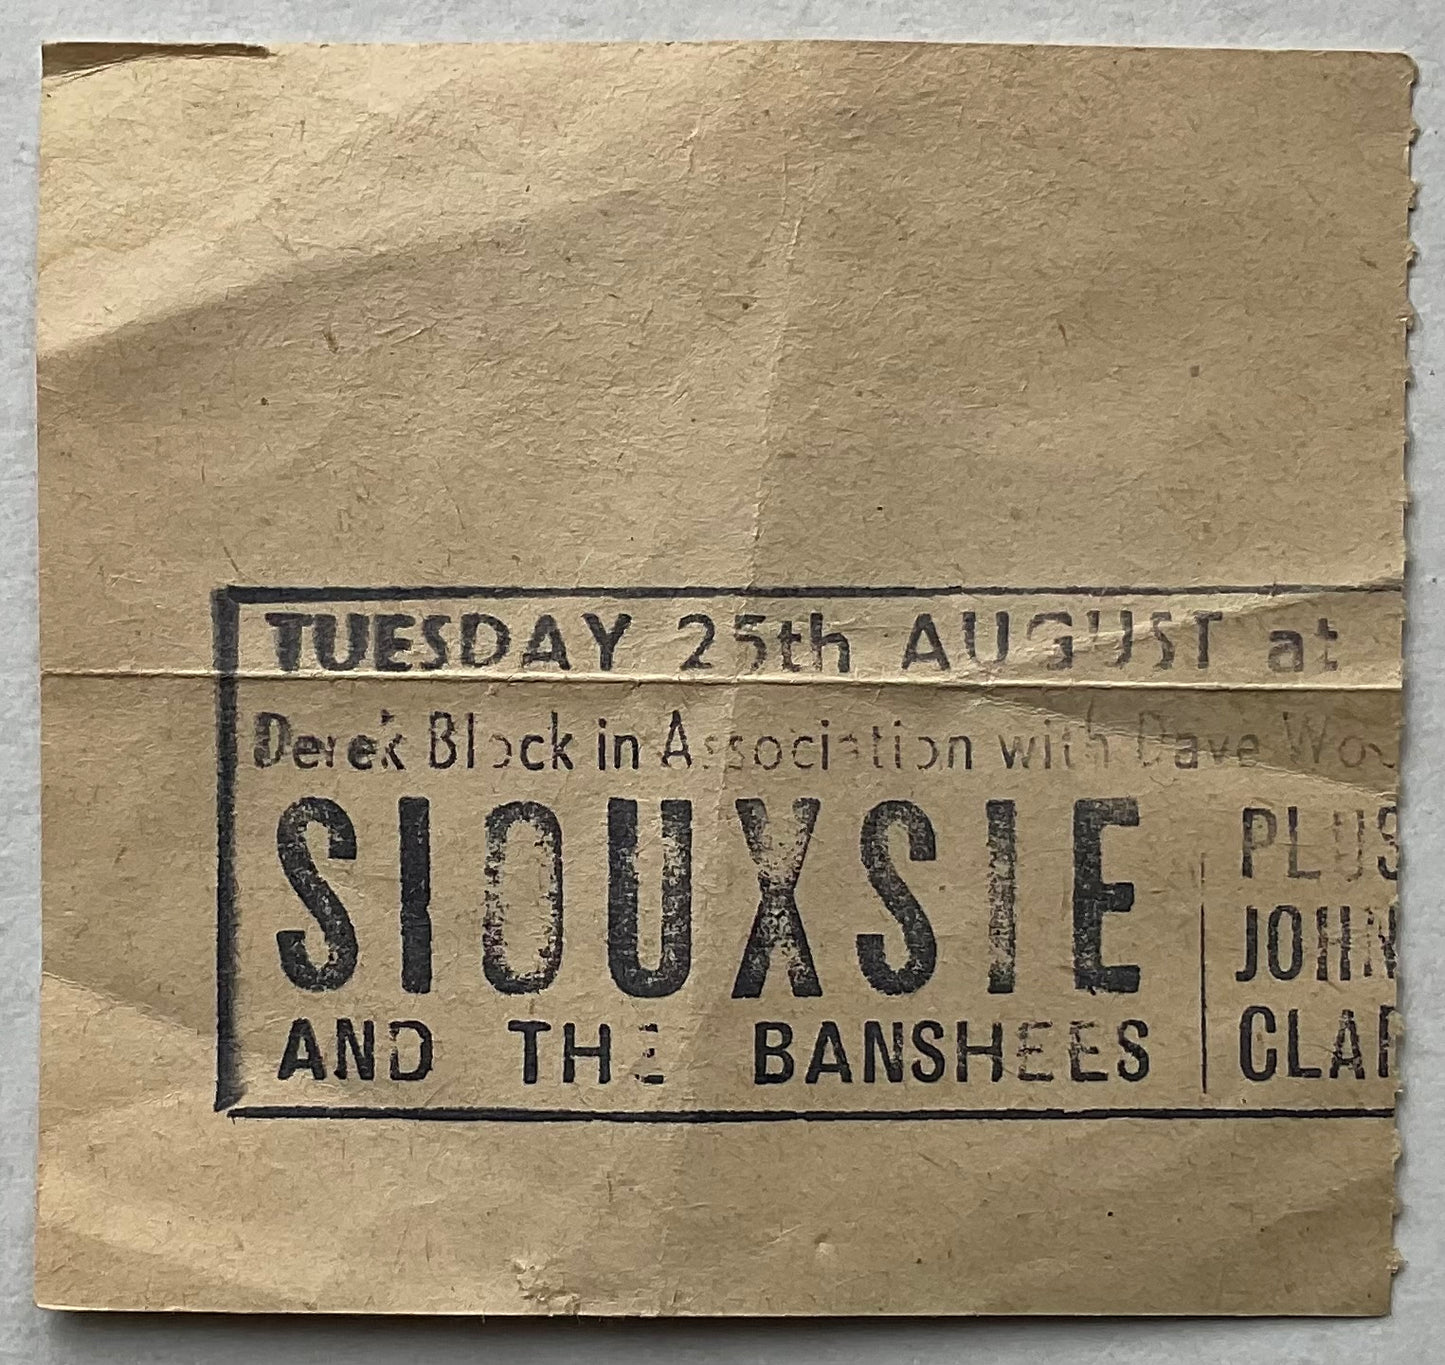 Siouxsie and the Banshees Original Used Concert Ticket Hammersmith Odeon London 25th Aug 1981